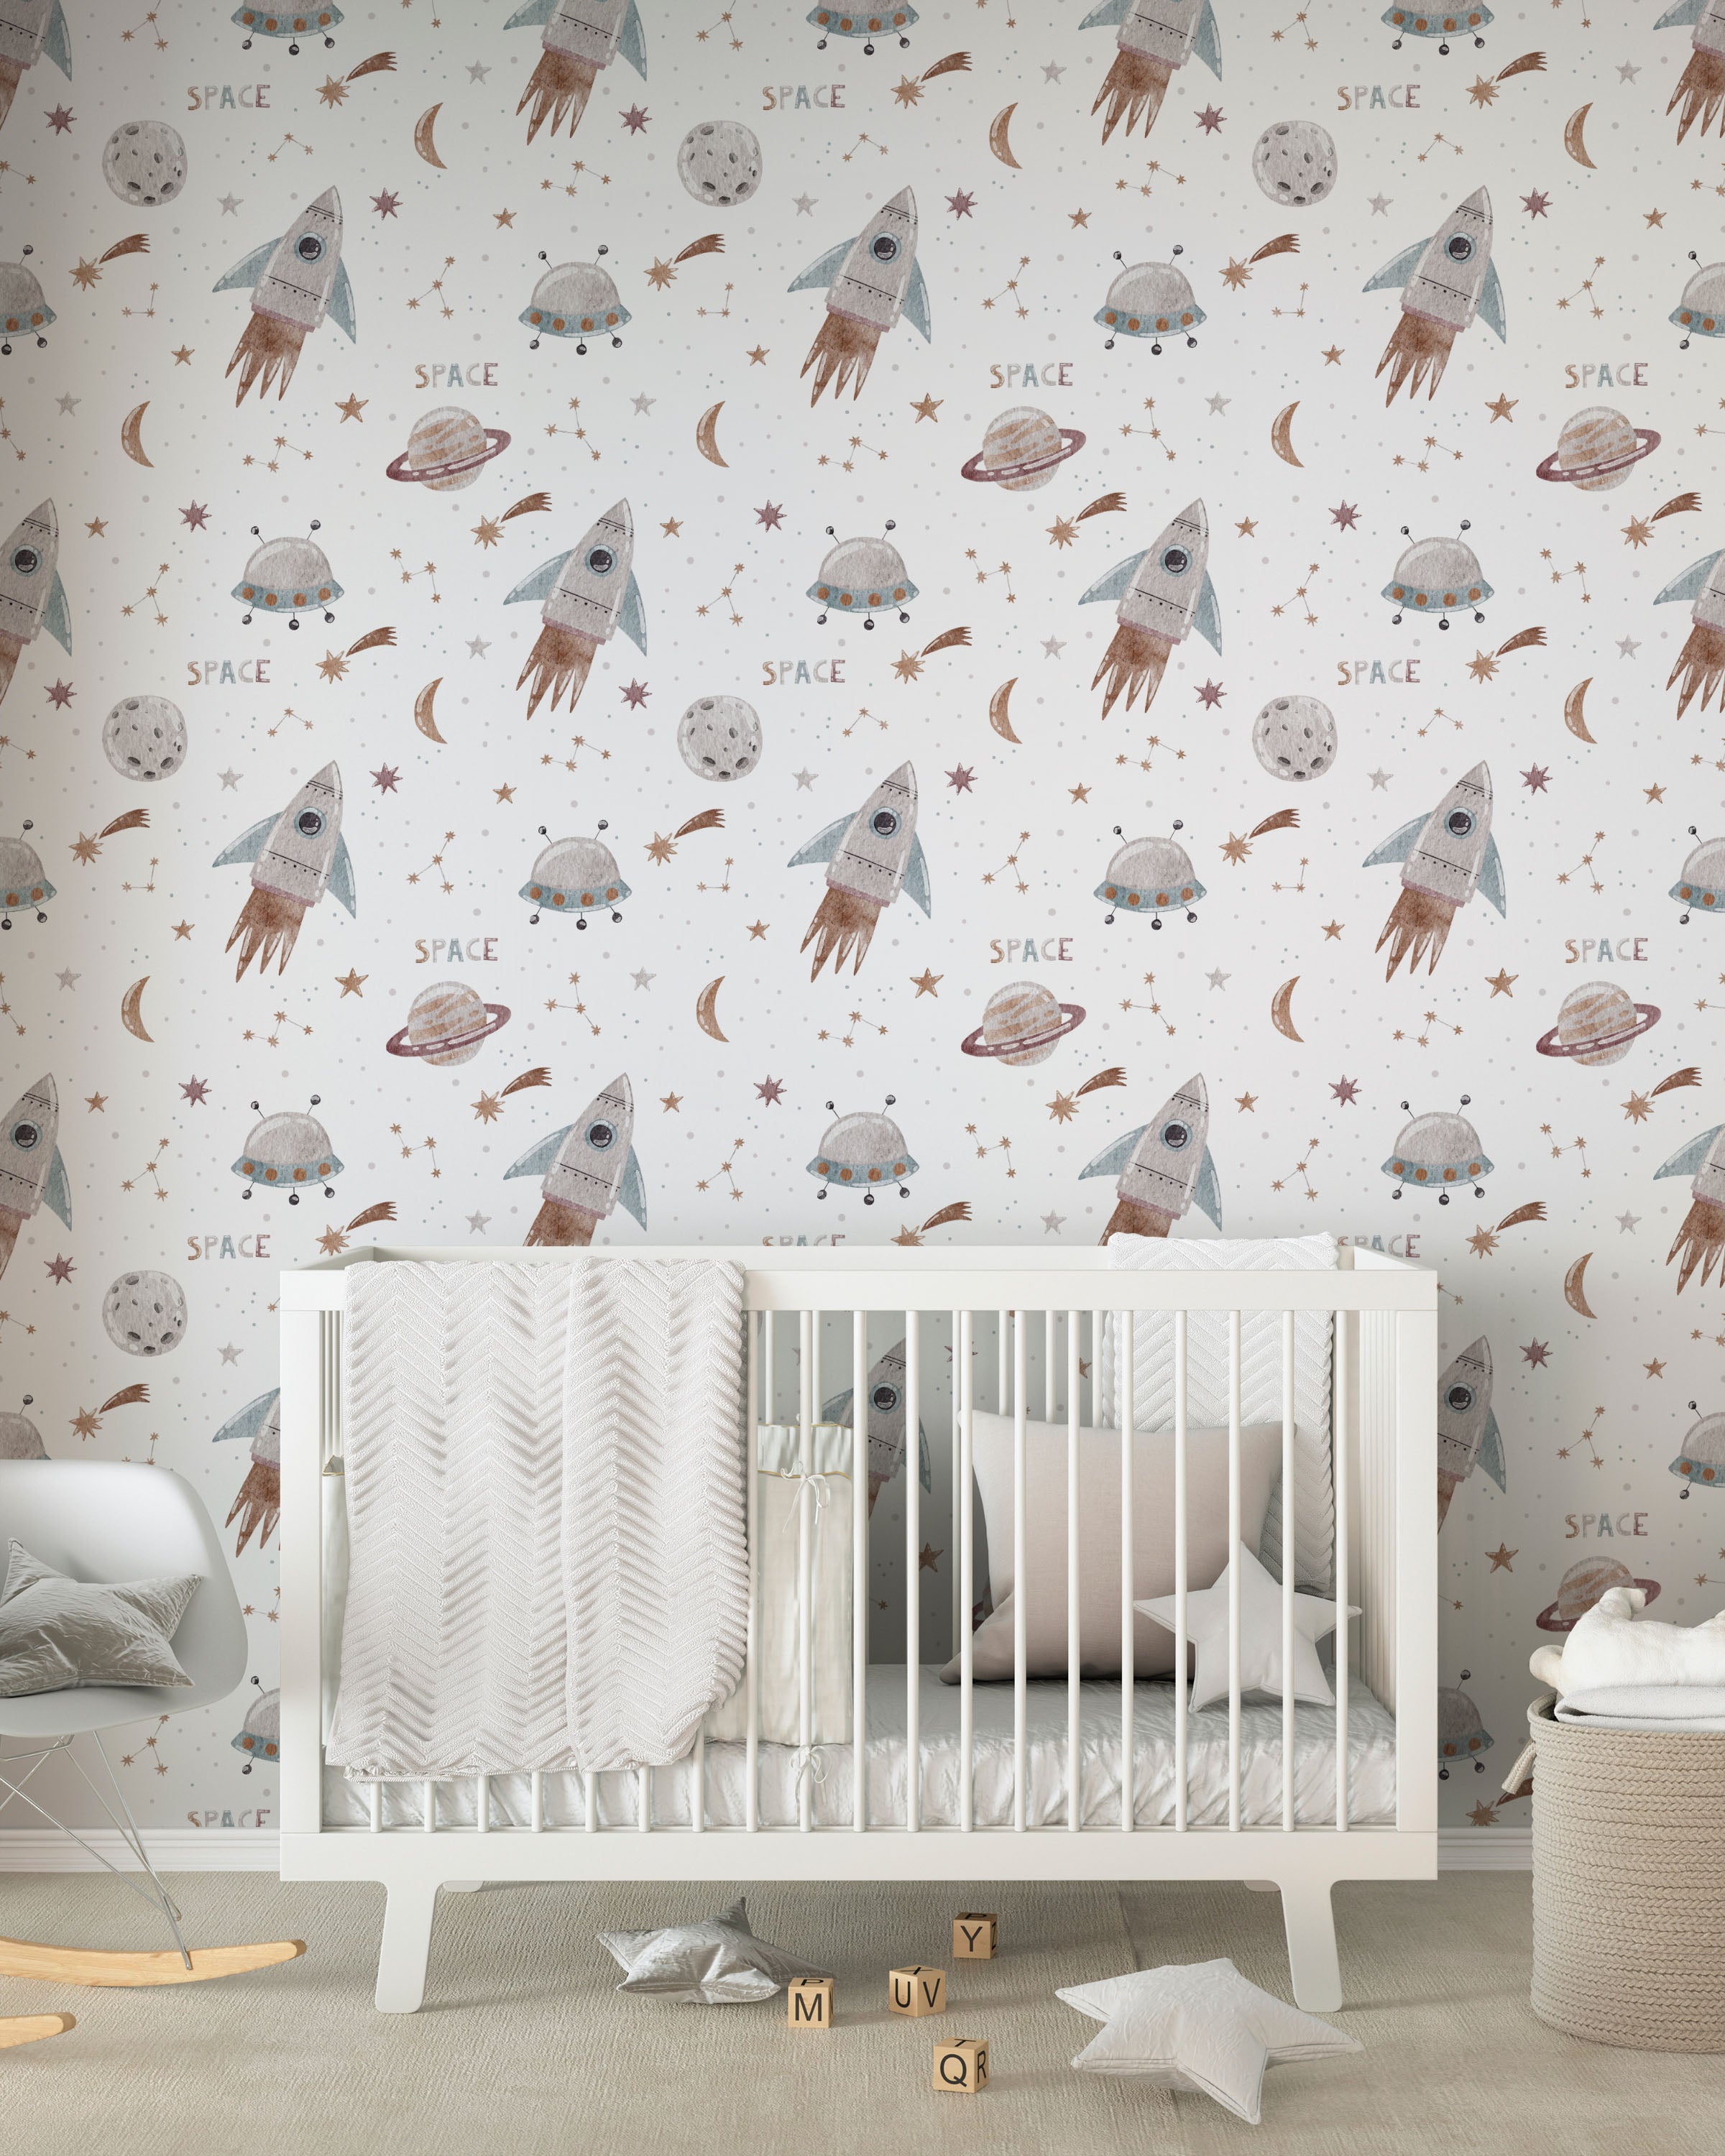 A charming nursery featuring the Space Craze Wallpaper, decorated with whimsical illustrations of rockets, UFOs, planets, and stars on a light background. The room includes a white crib draped with a soft, textured blanket, creating a playful yet serene space for a child.